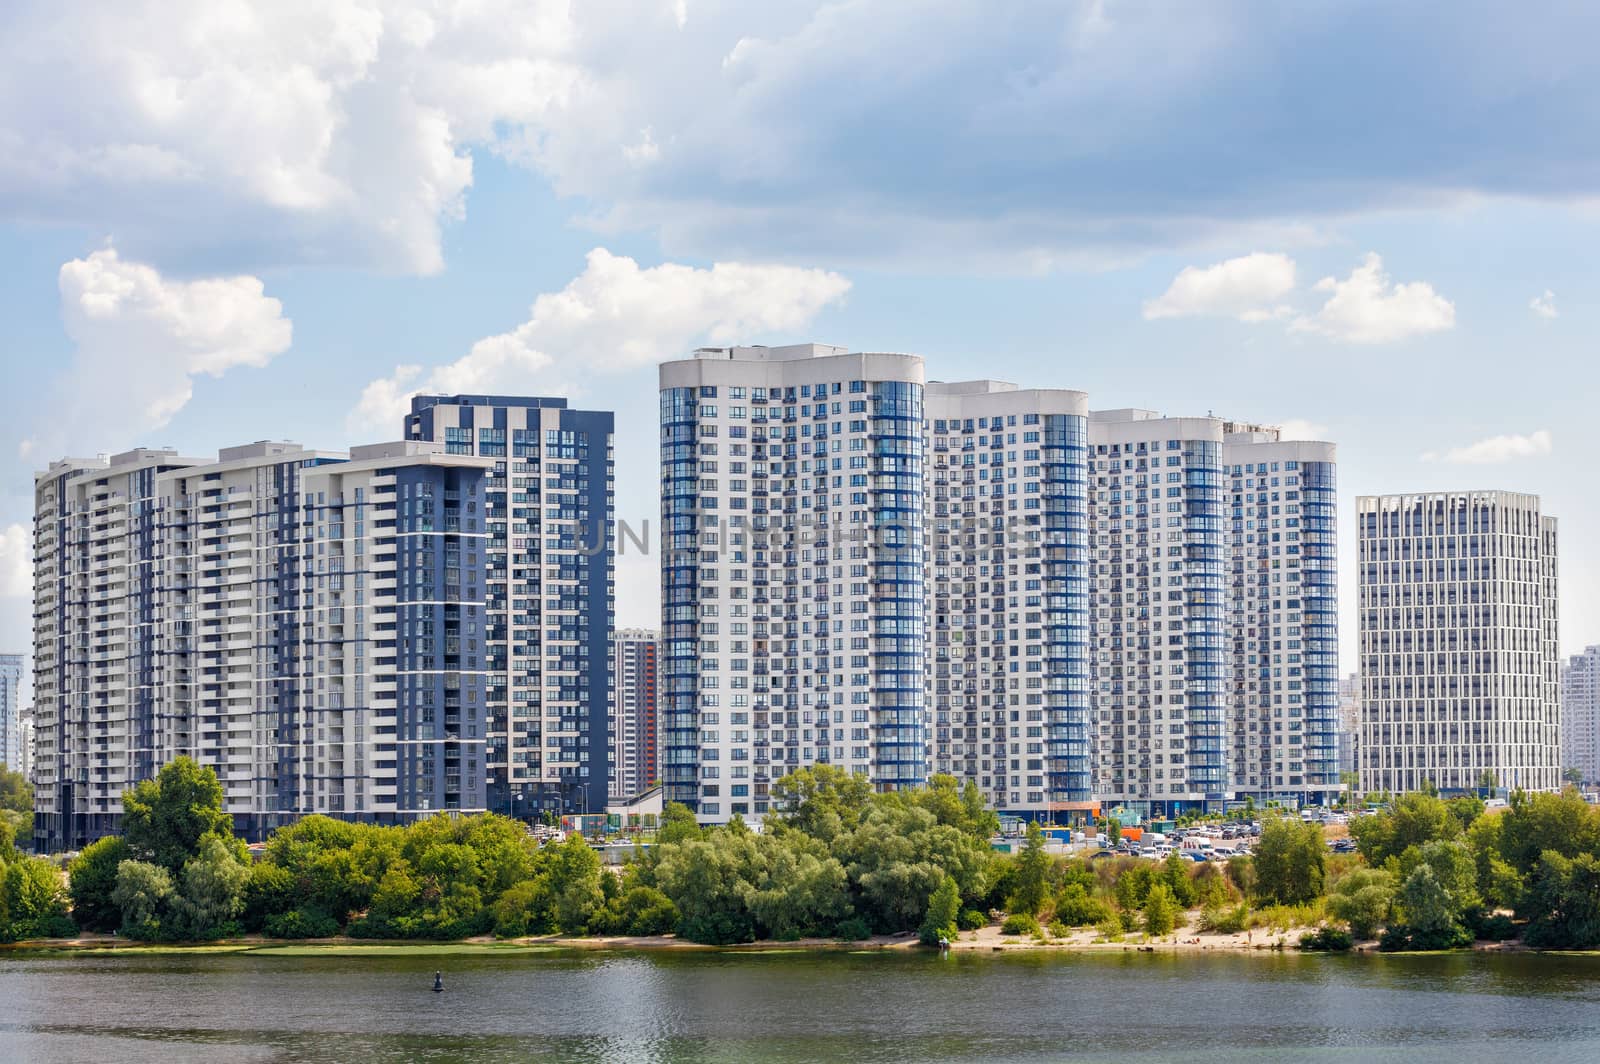 The facades of new residential high-rise buildings on the banks of the river and against the blue cloudy sky. by Sergii